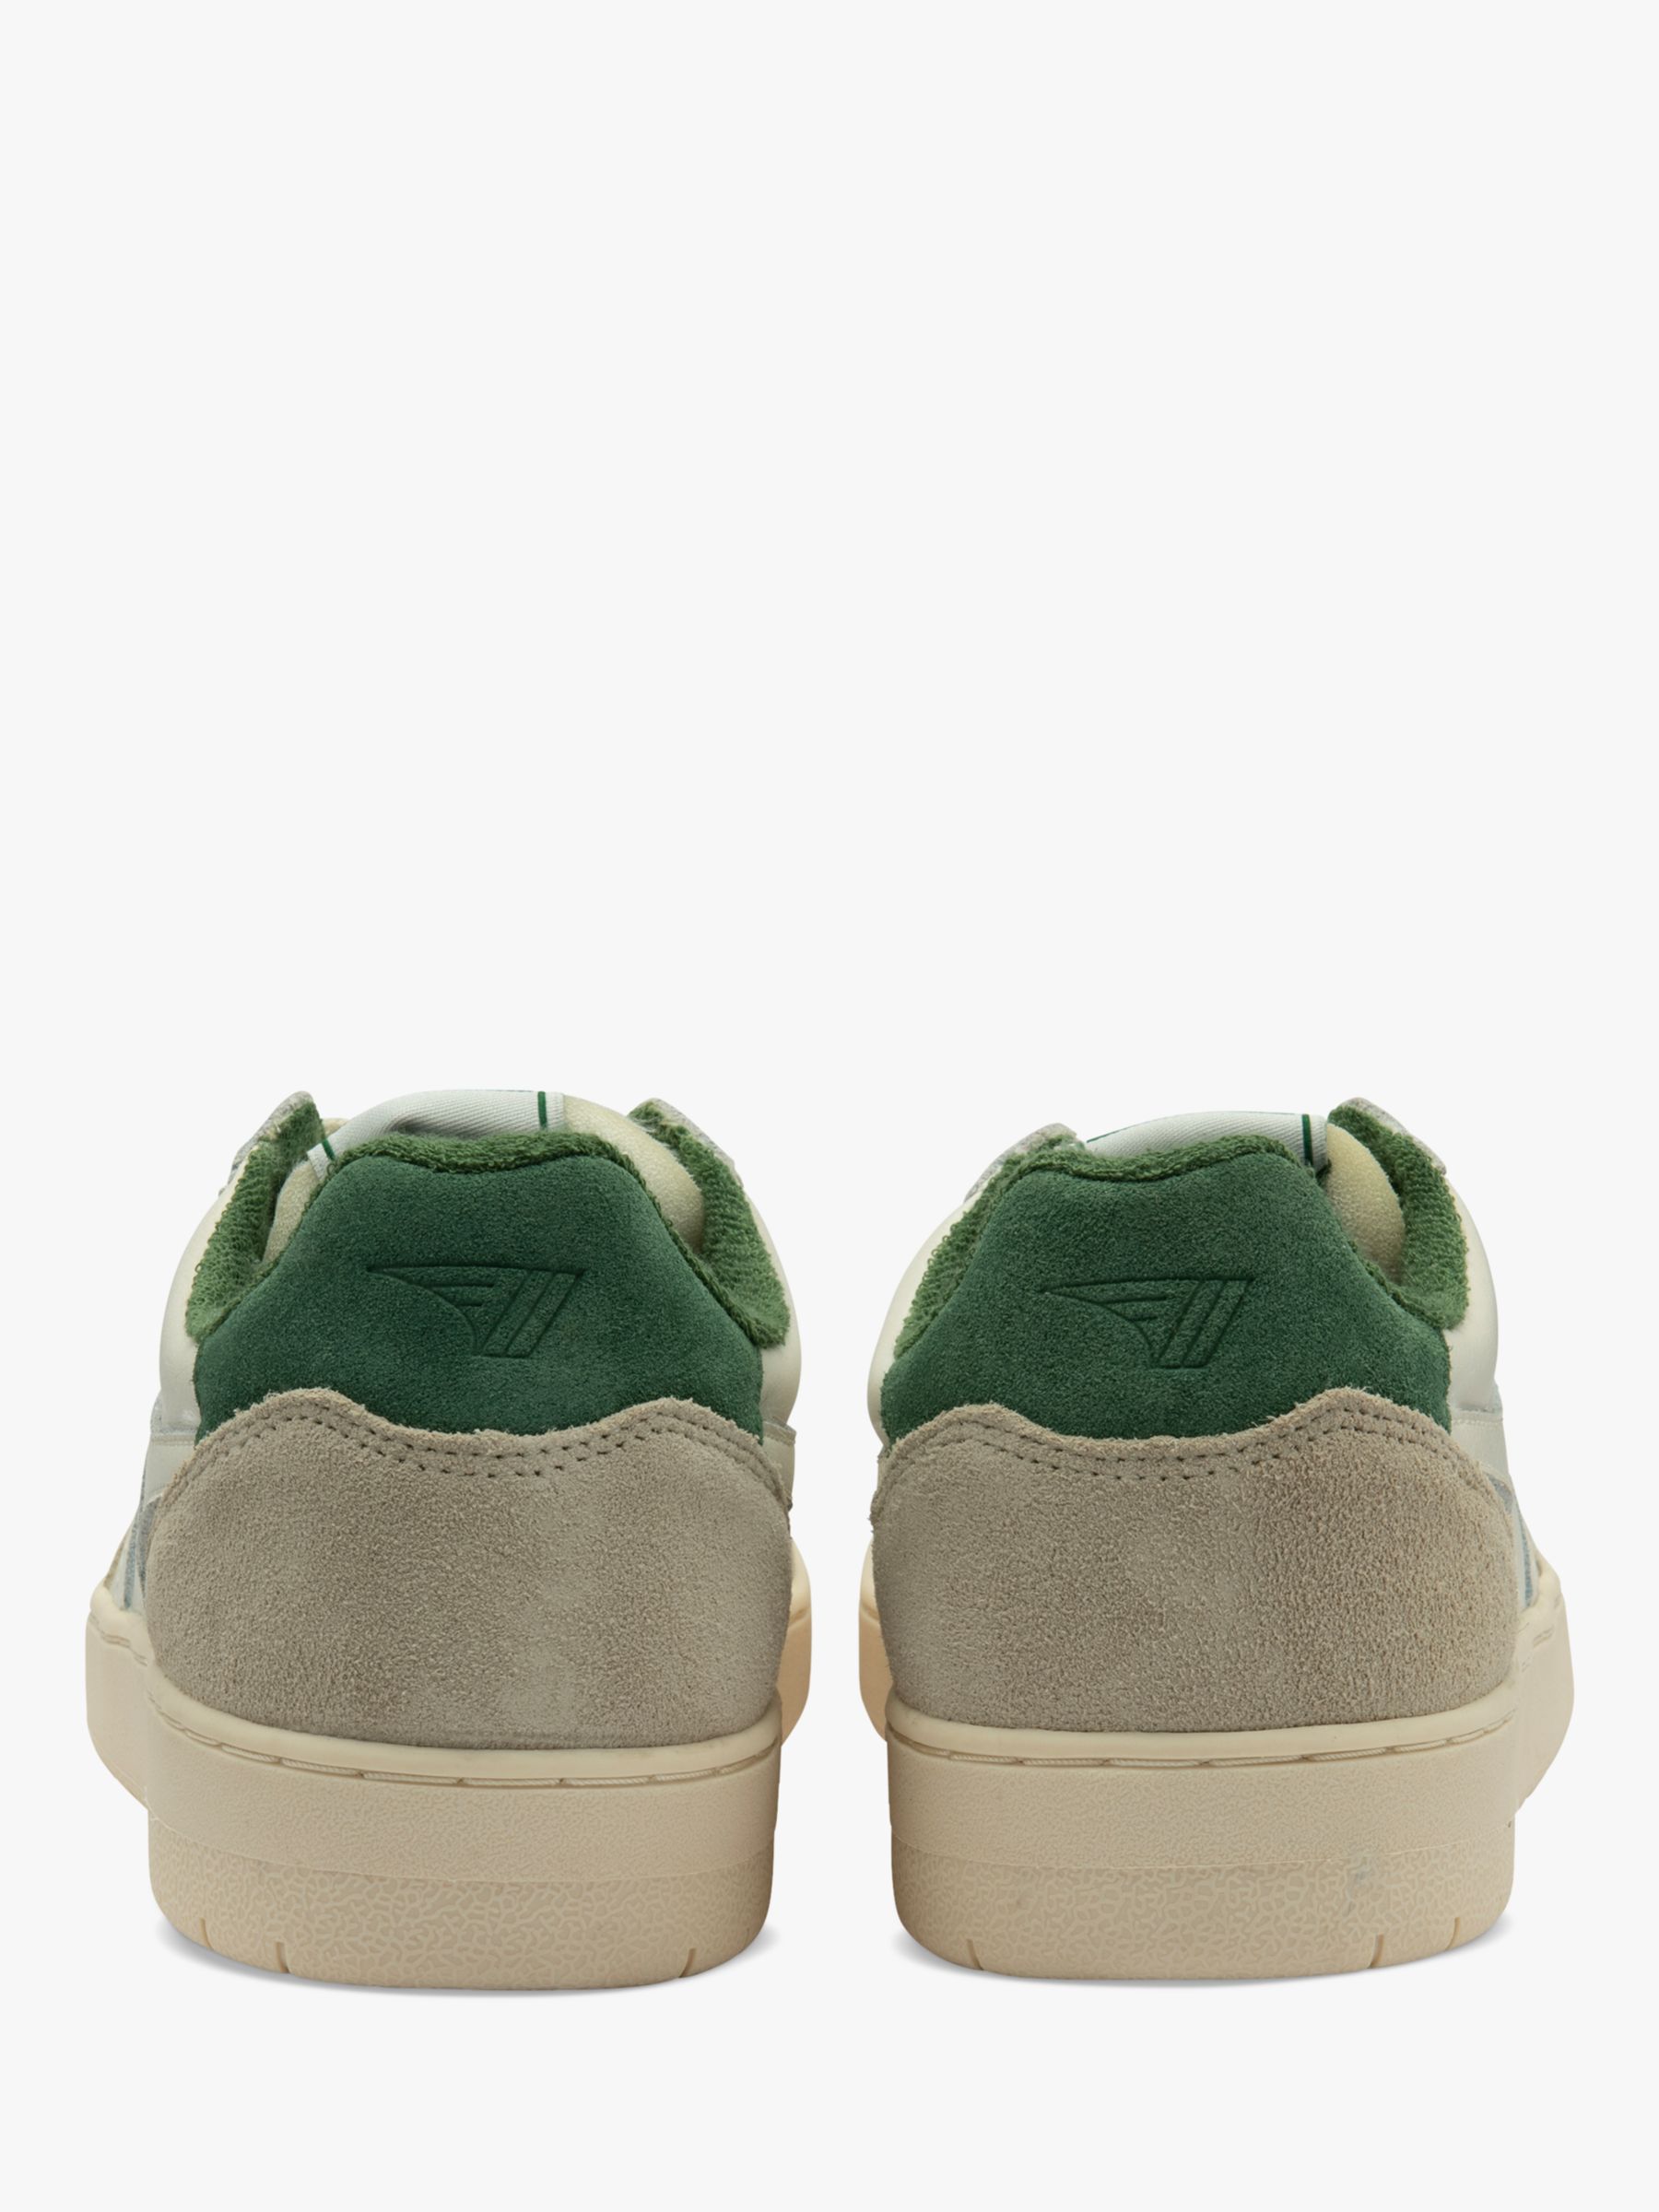 Gola Eagle Leather Lace Up Trainers, Off White/Evergreen at John Lewis ...